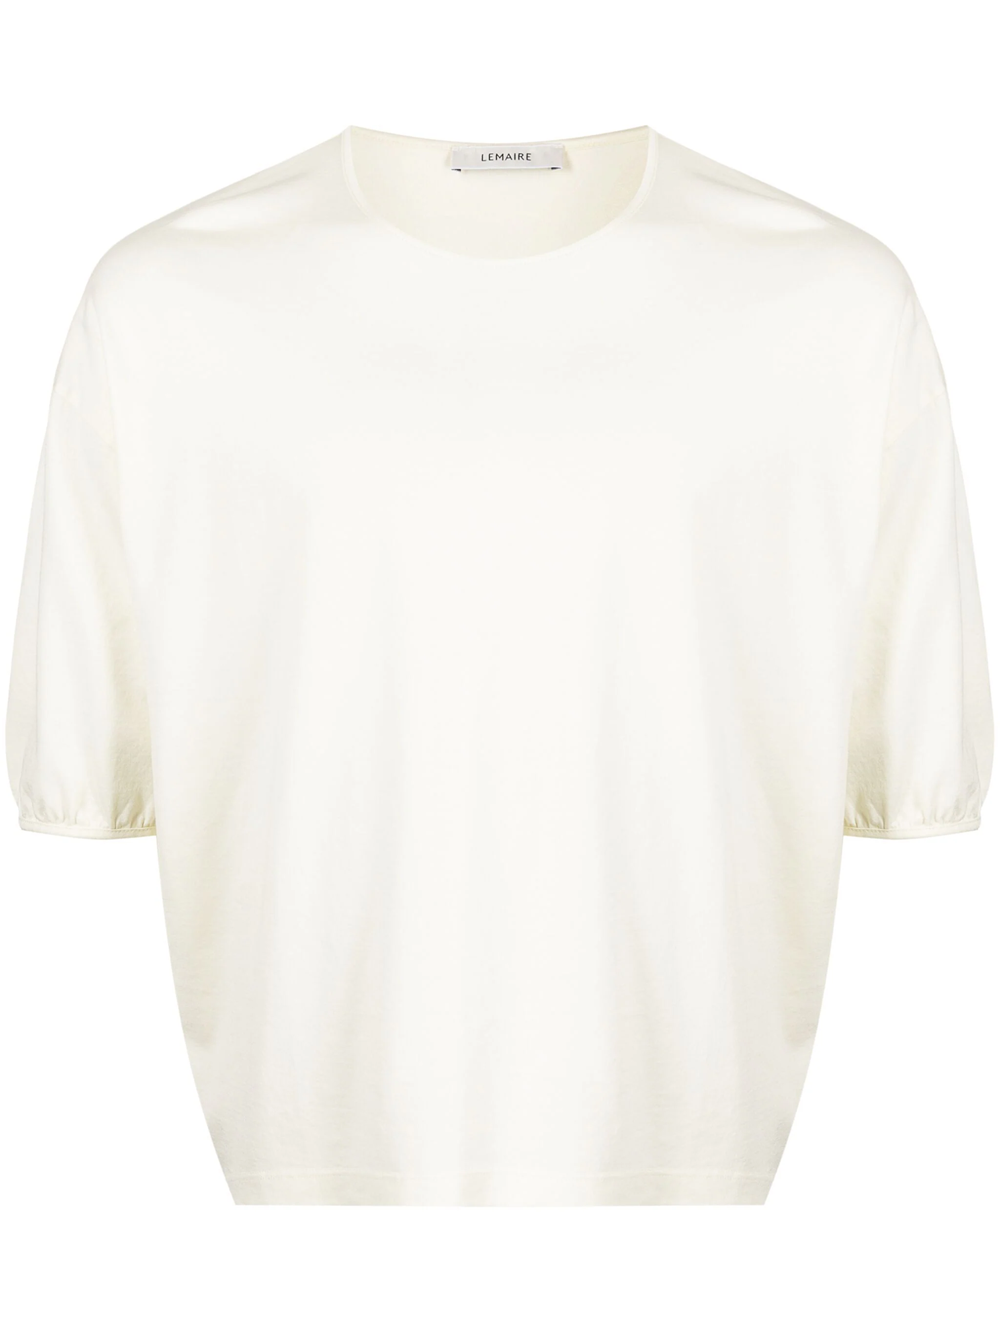 LEMAIRE T-SHIRT WITH LOW SHOULDER SLEEVES